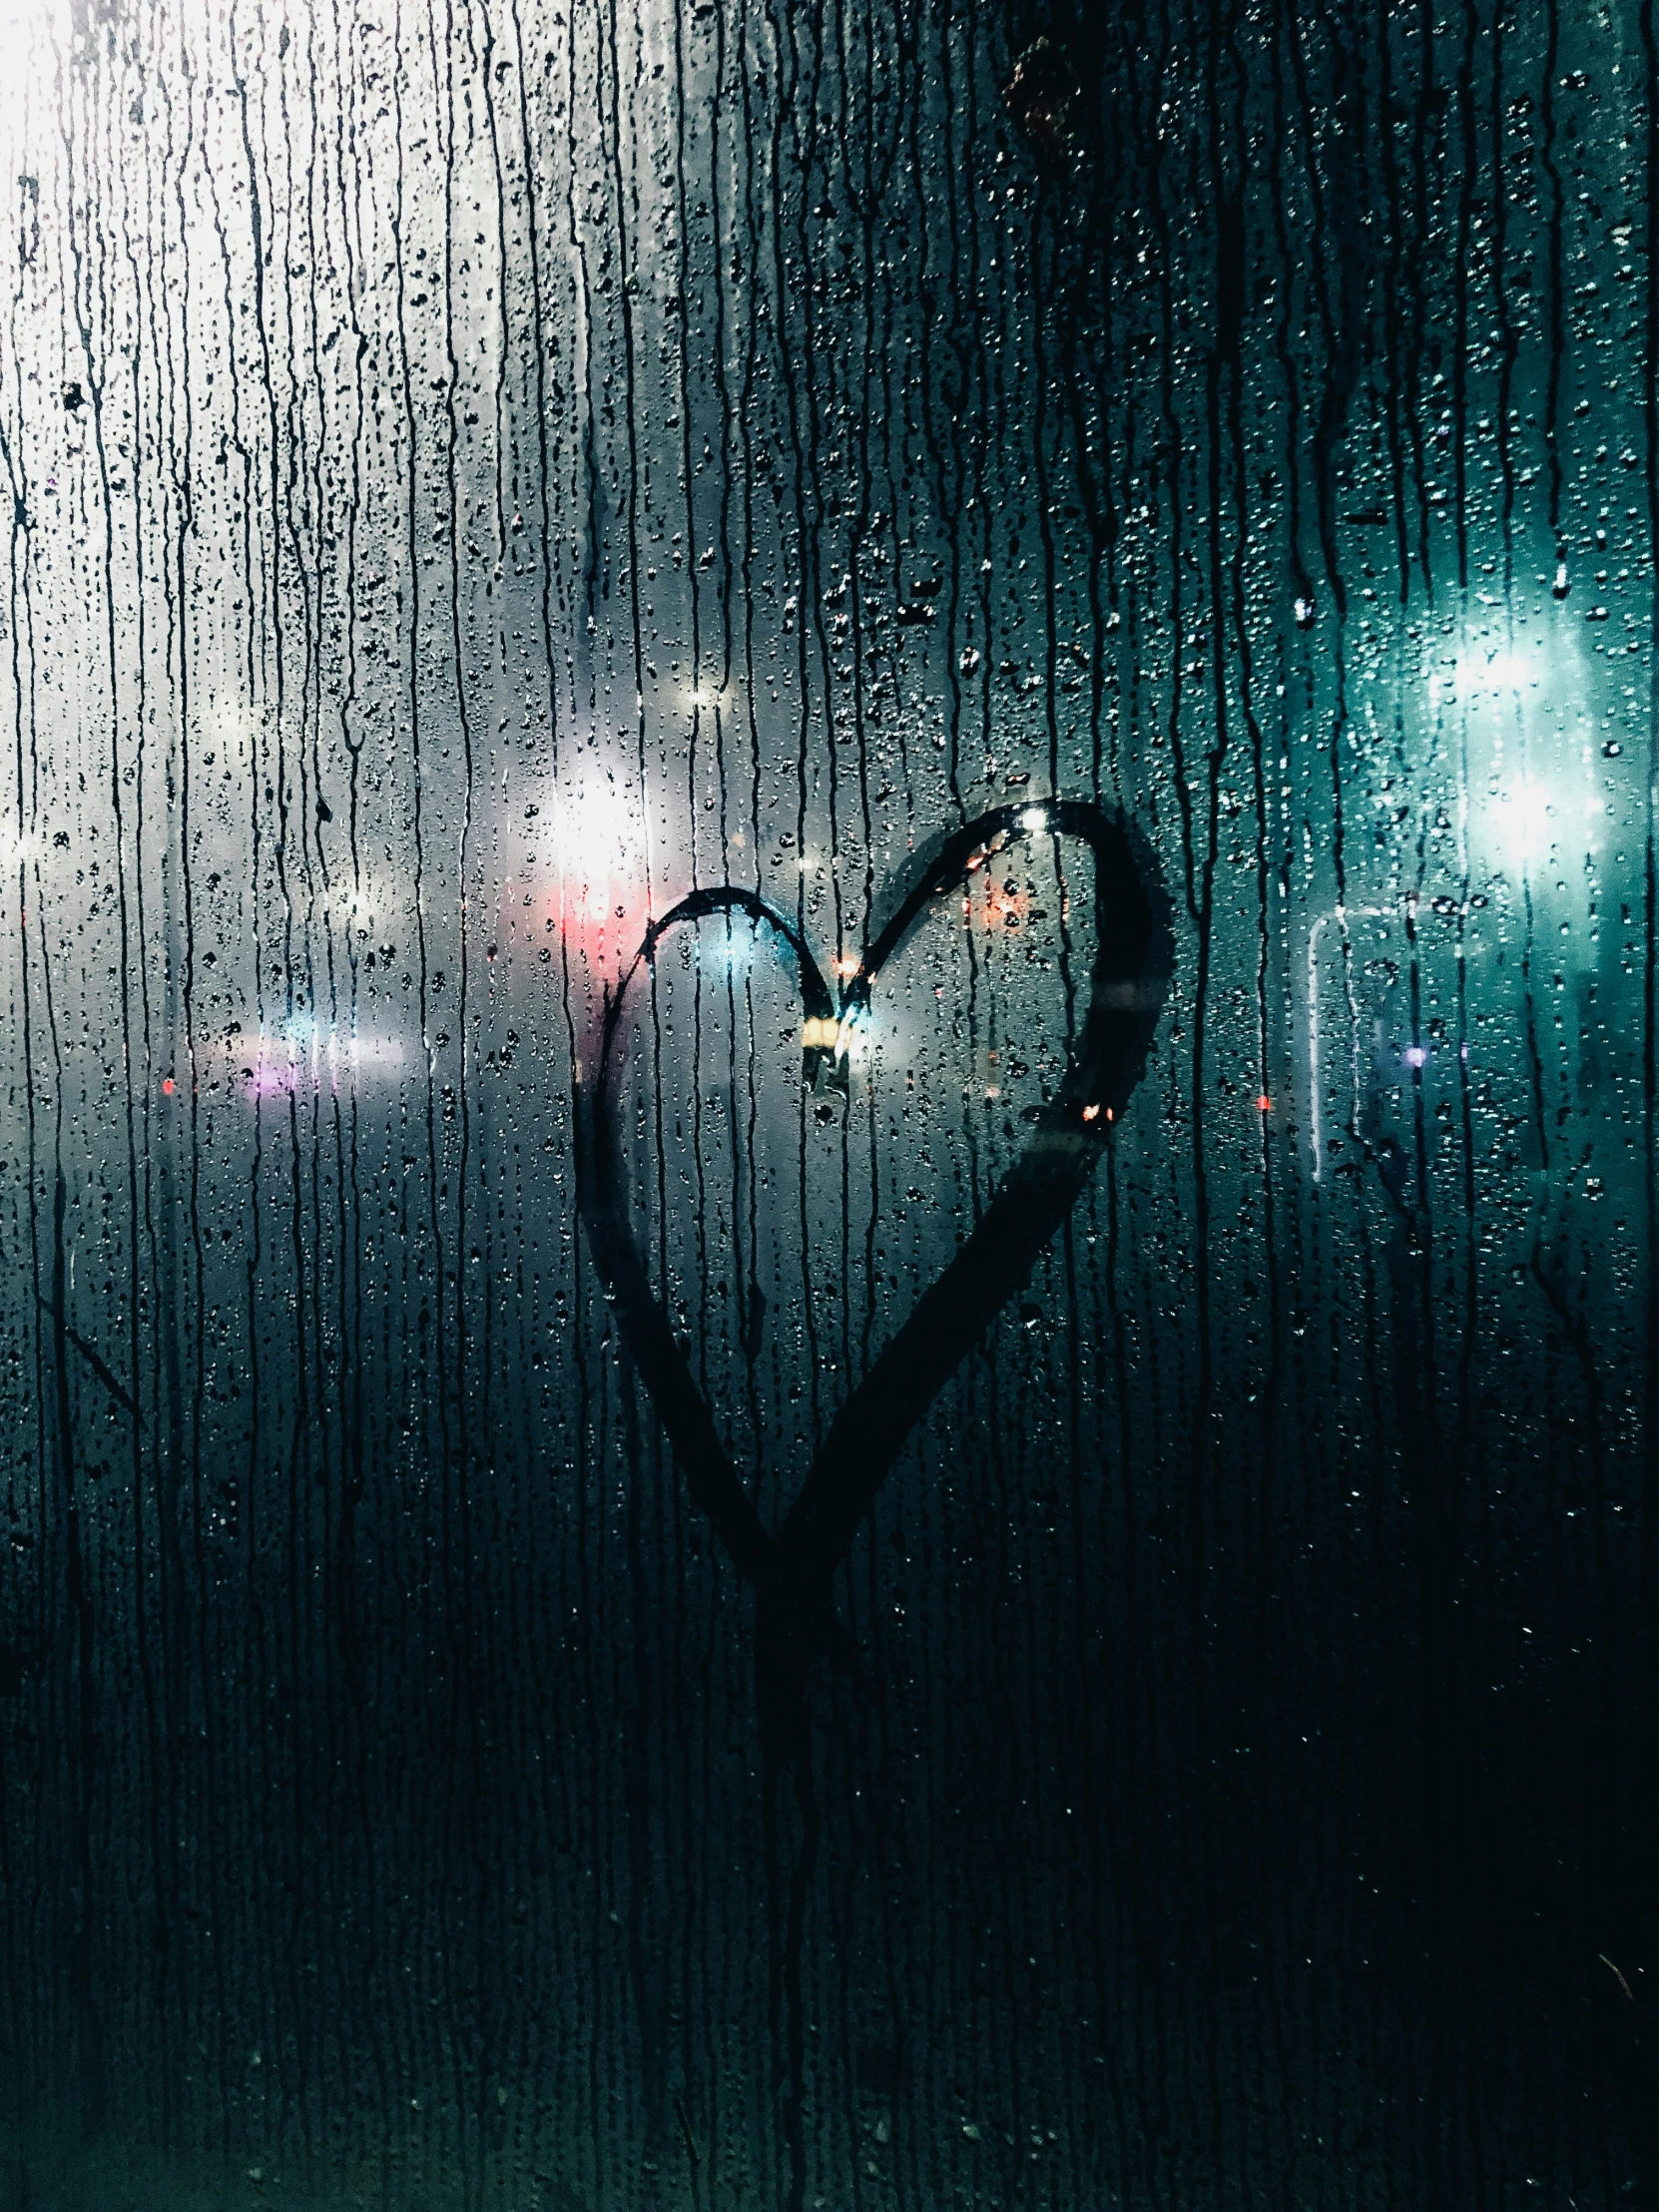 the image shows a heart as raindrops fall